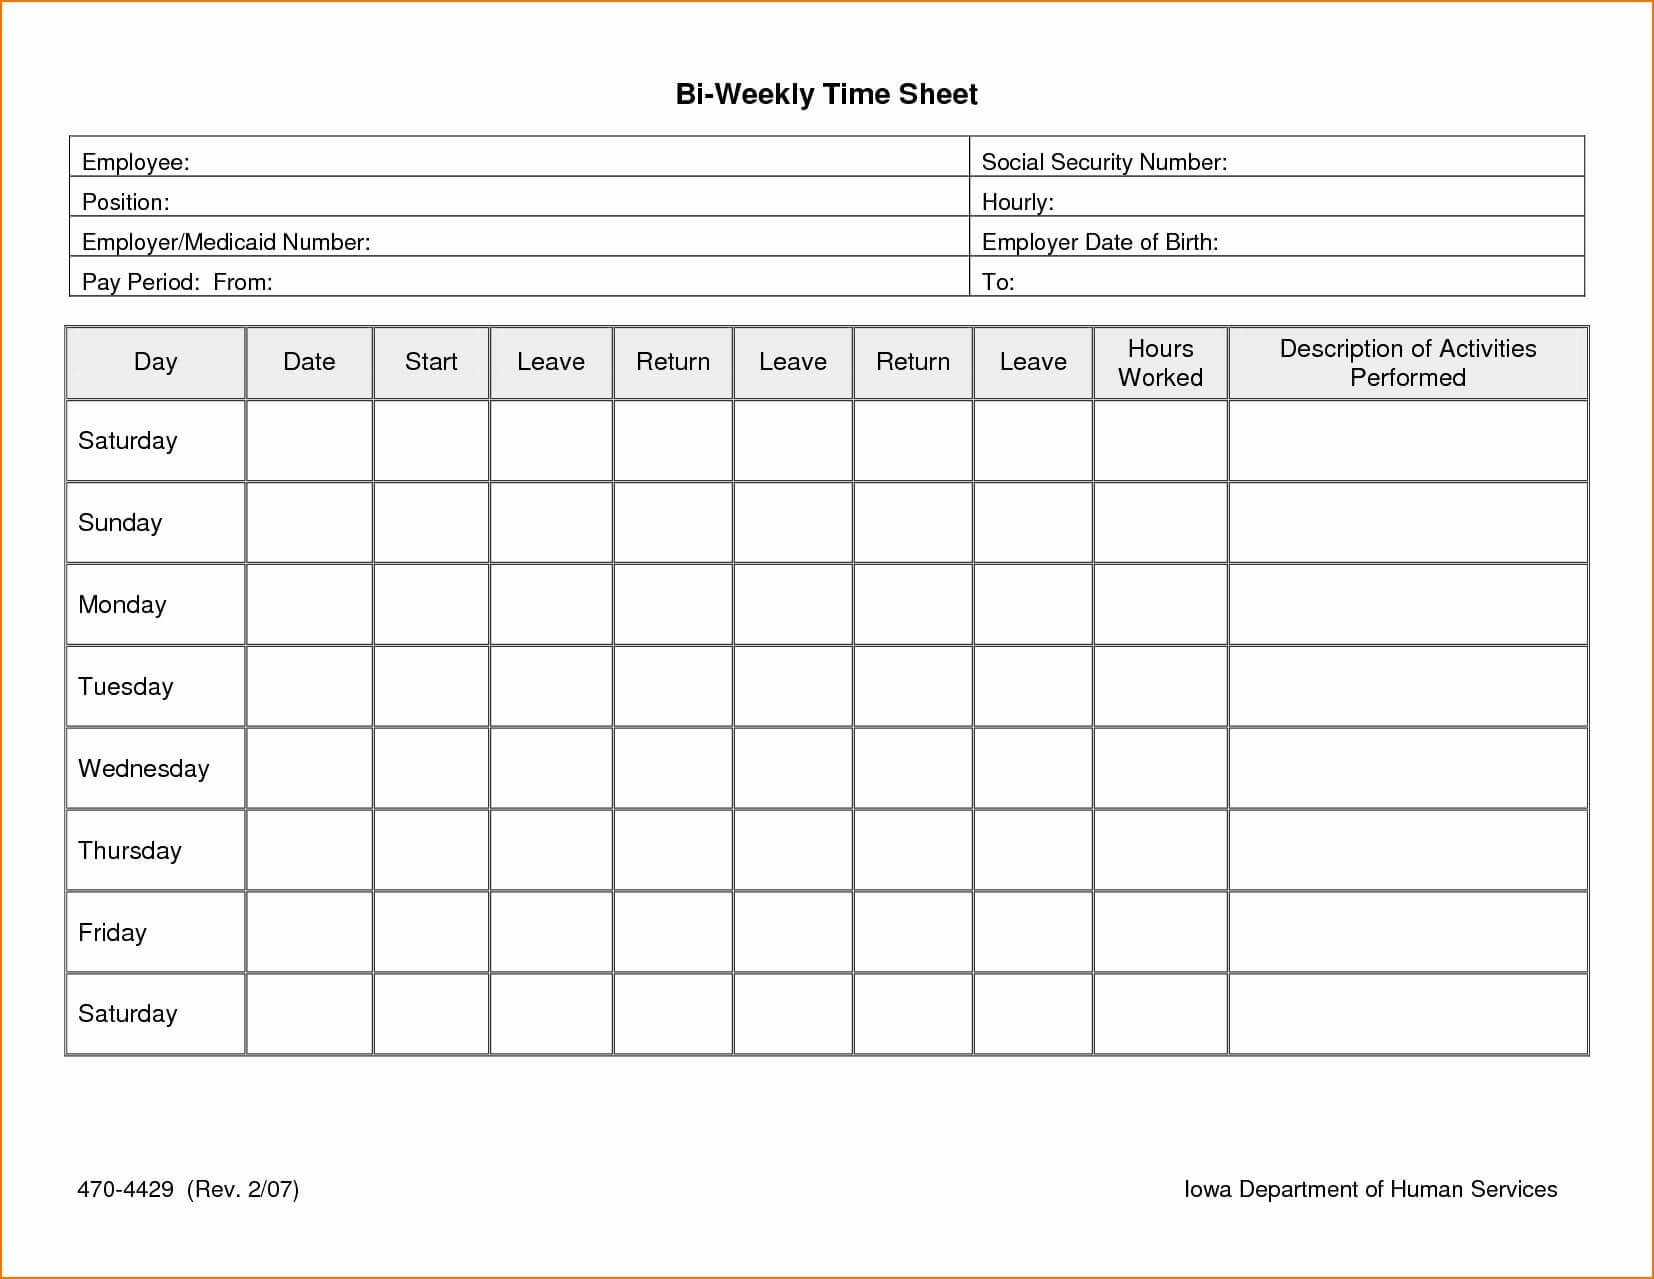 009 Time Card Template Free Excel 1654X1279 Incredible Ideas Inside Weekly Time Card Template Free